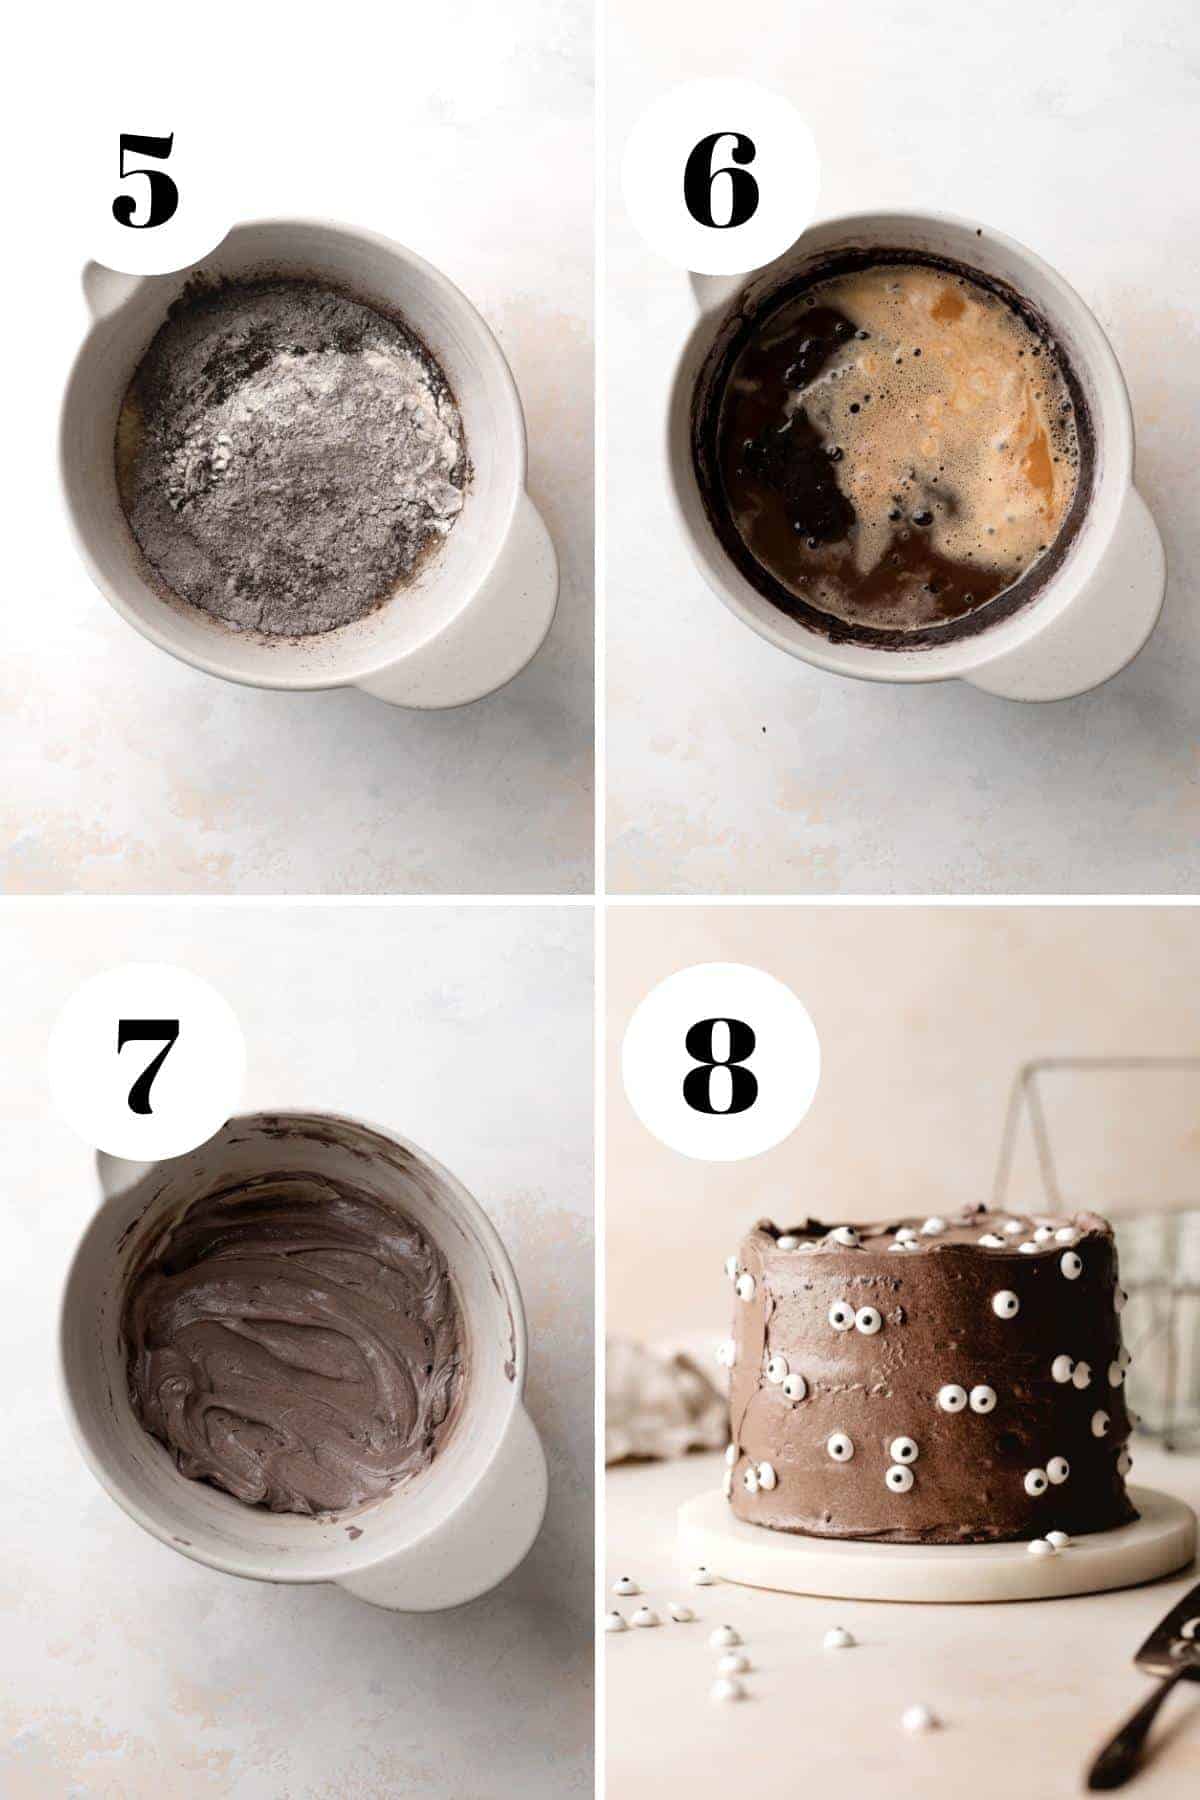 a process collage of the steps for making black velvet cake.